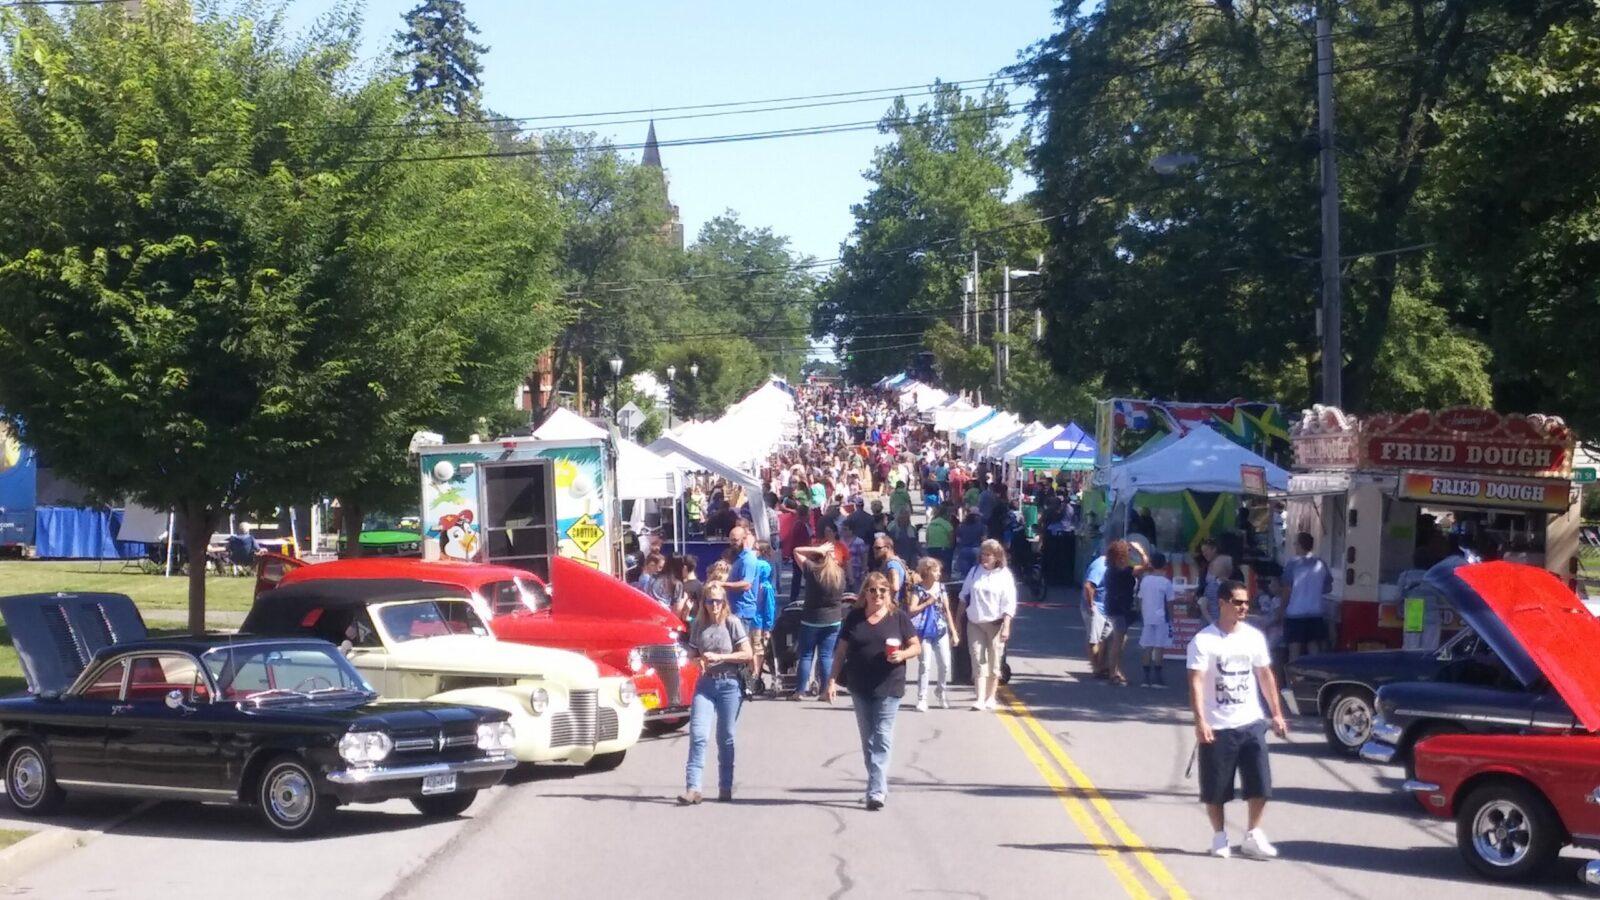 Brockport Arts Festival Cars And Street Crowd